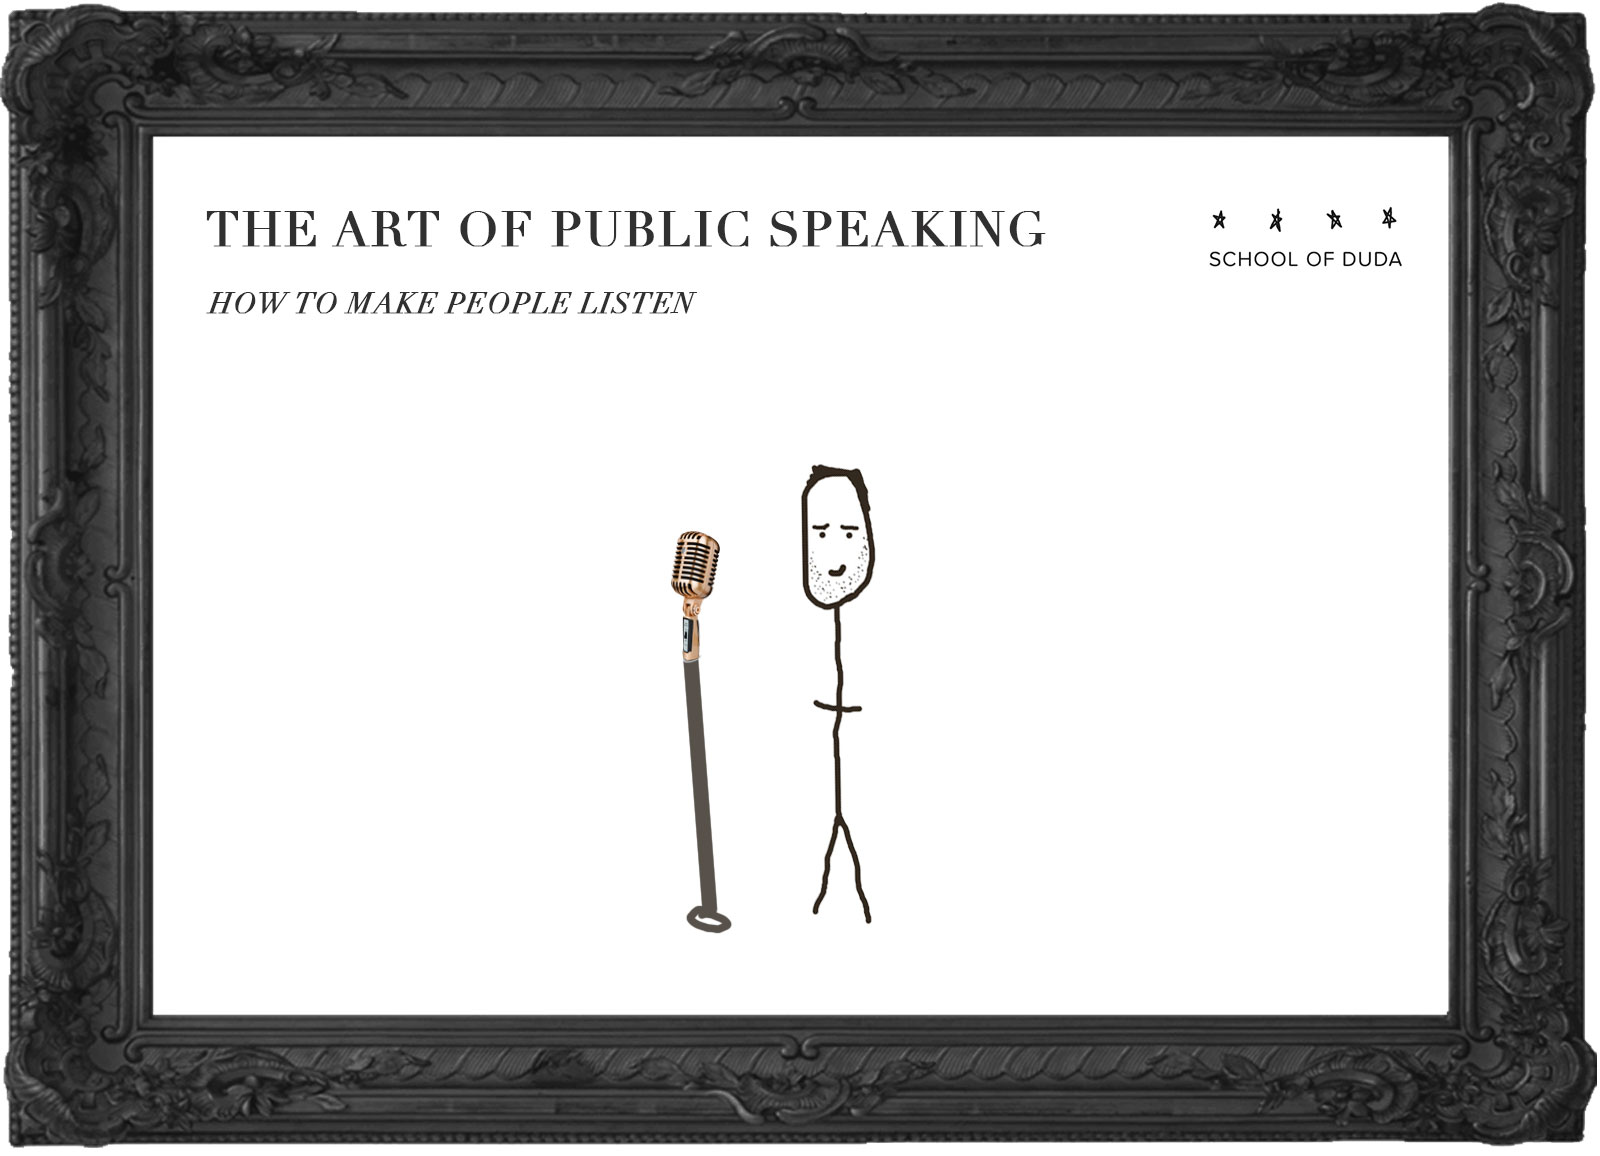 THE ART OF PUBLIC SPEAKING - English Course